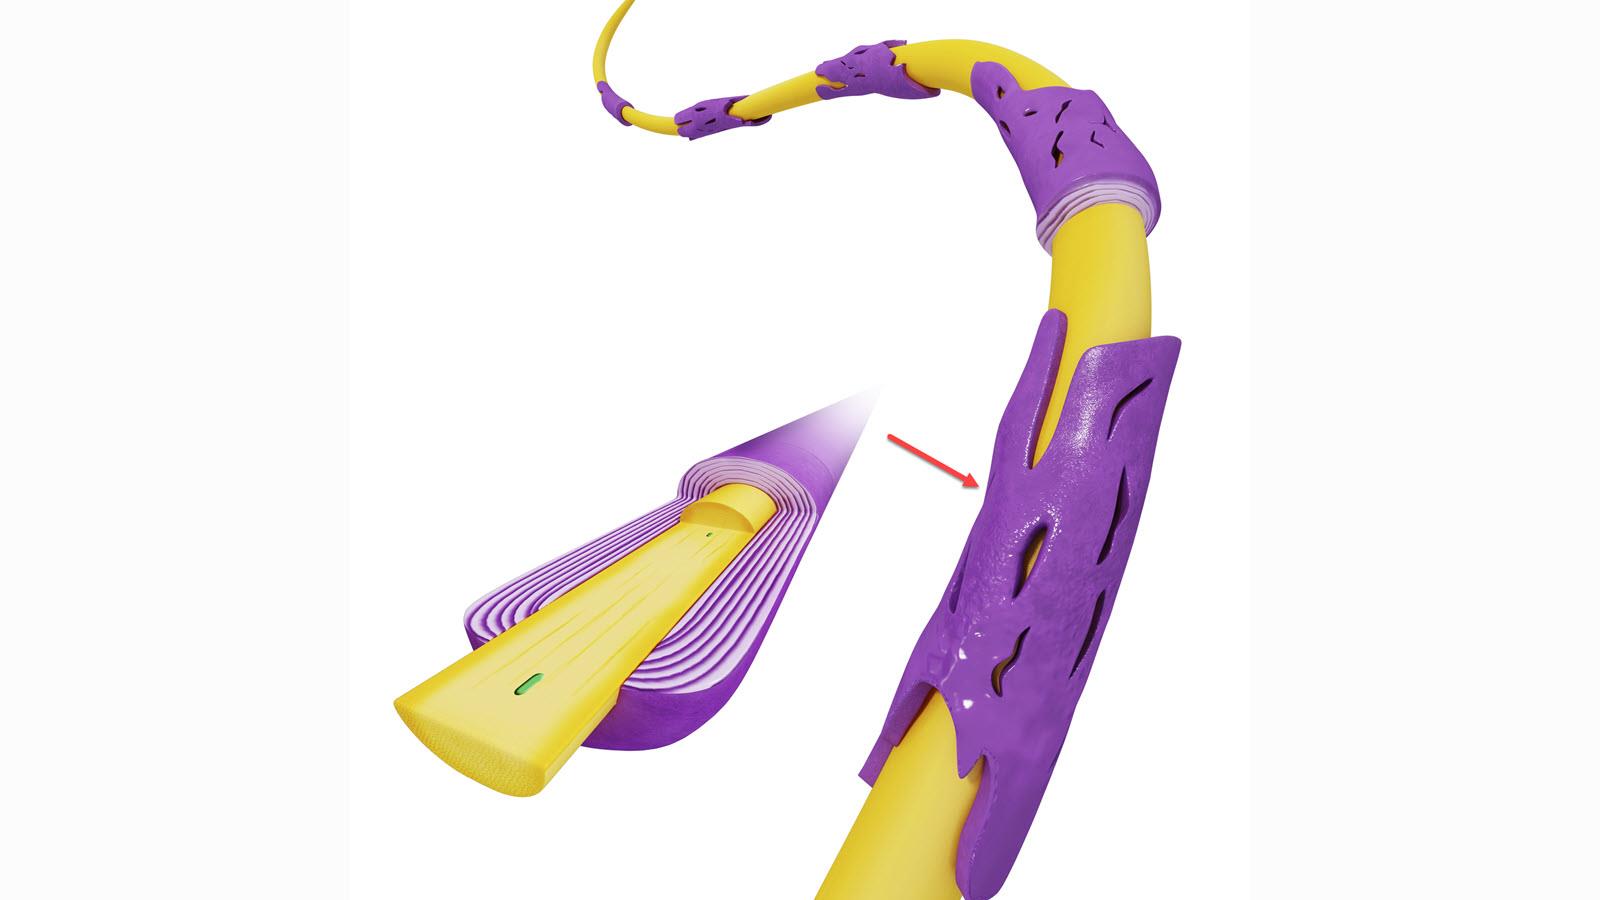 Illustration of myelin (shown in purple) covering a yellow nerve